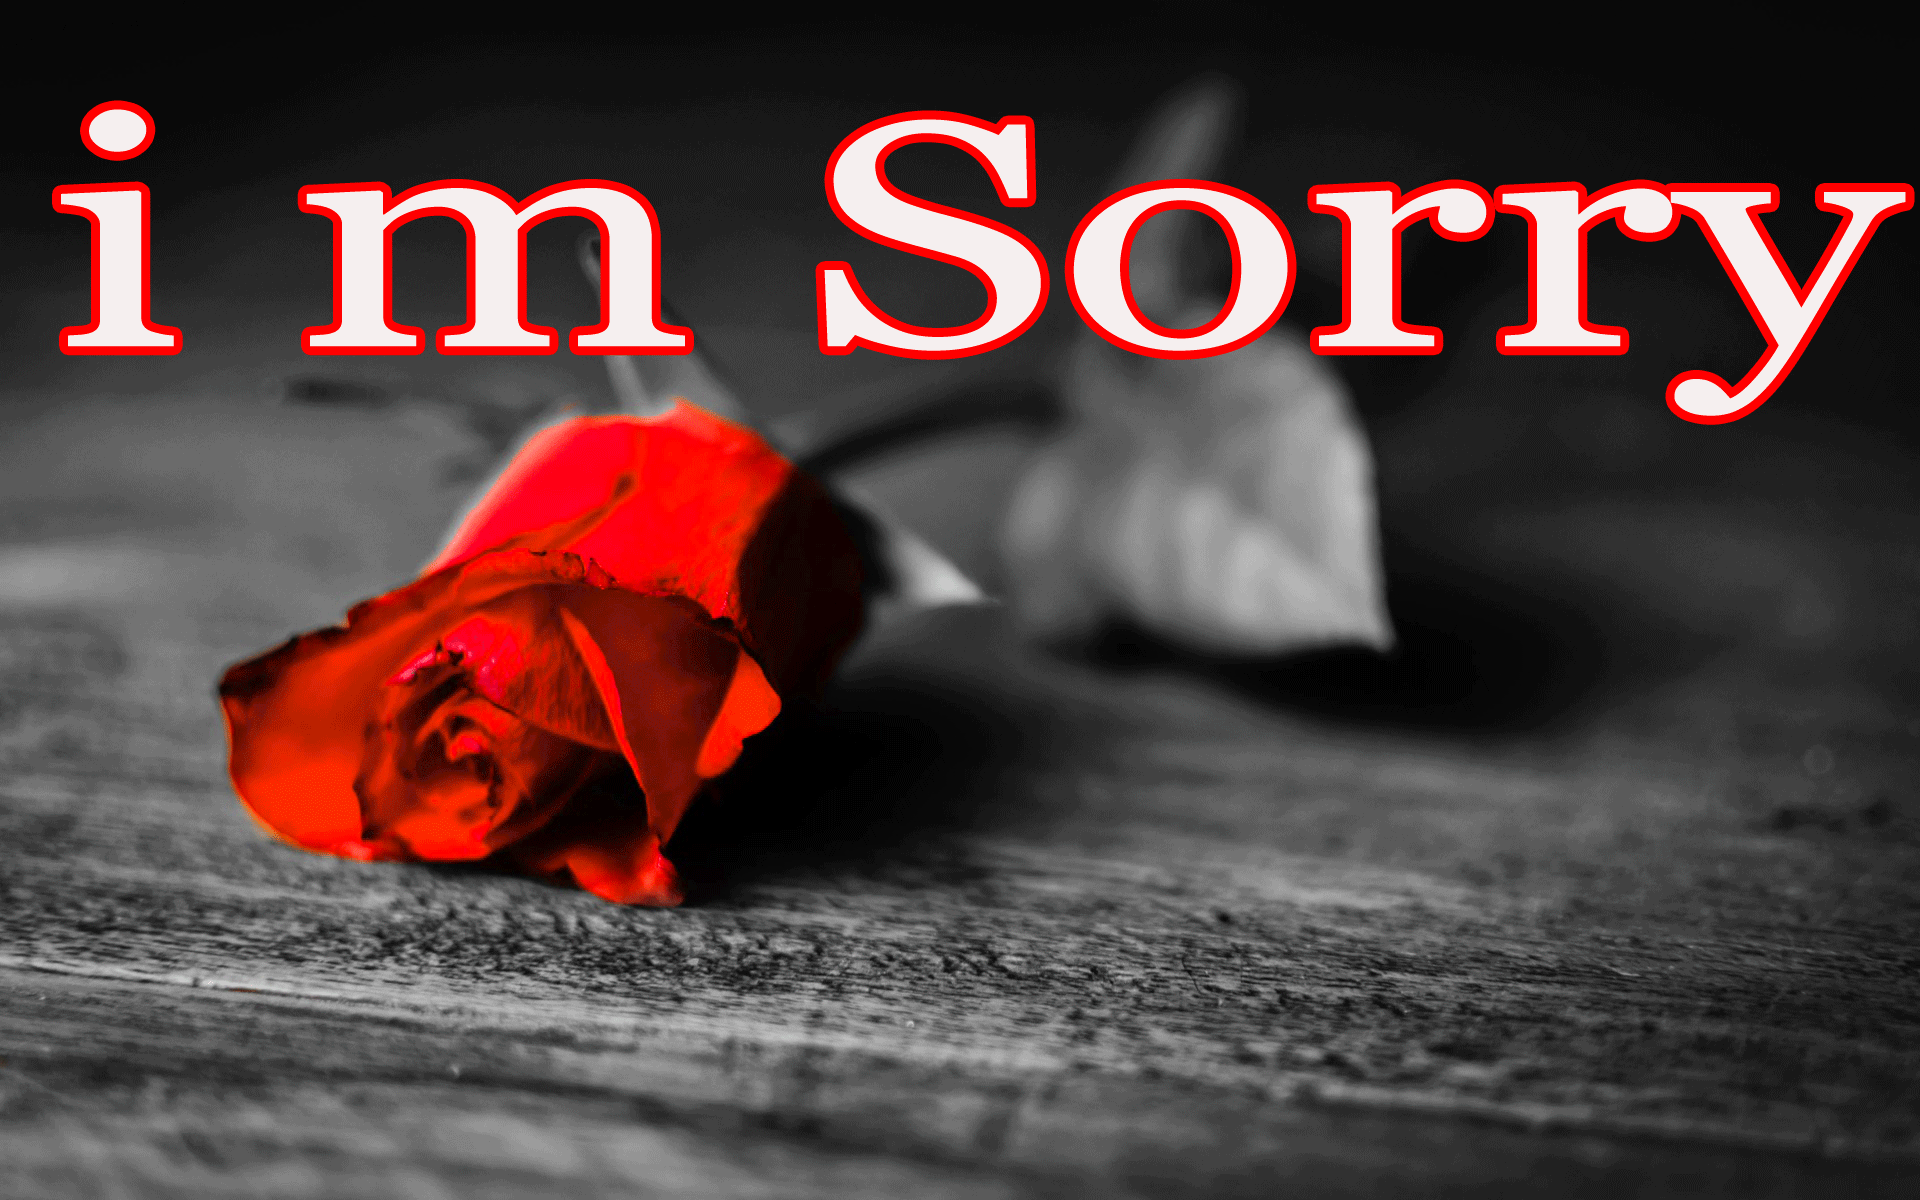 Free Download I Am Sorry Images Wallpaper Photo Pics Download Red Rose Dark 19x10 For Your Desktop Mobile Tablet Explore 46 Sorry Backgrounds Wallpaper Of Sorry Sorry Wallpapers Sorry Wallpaper